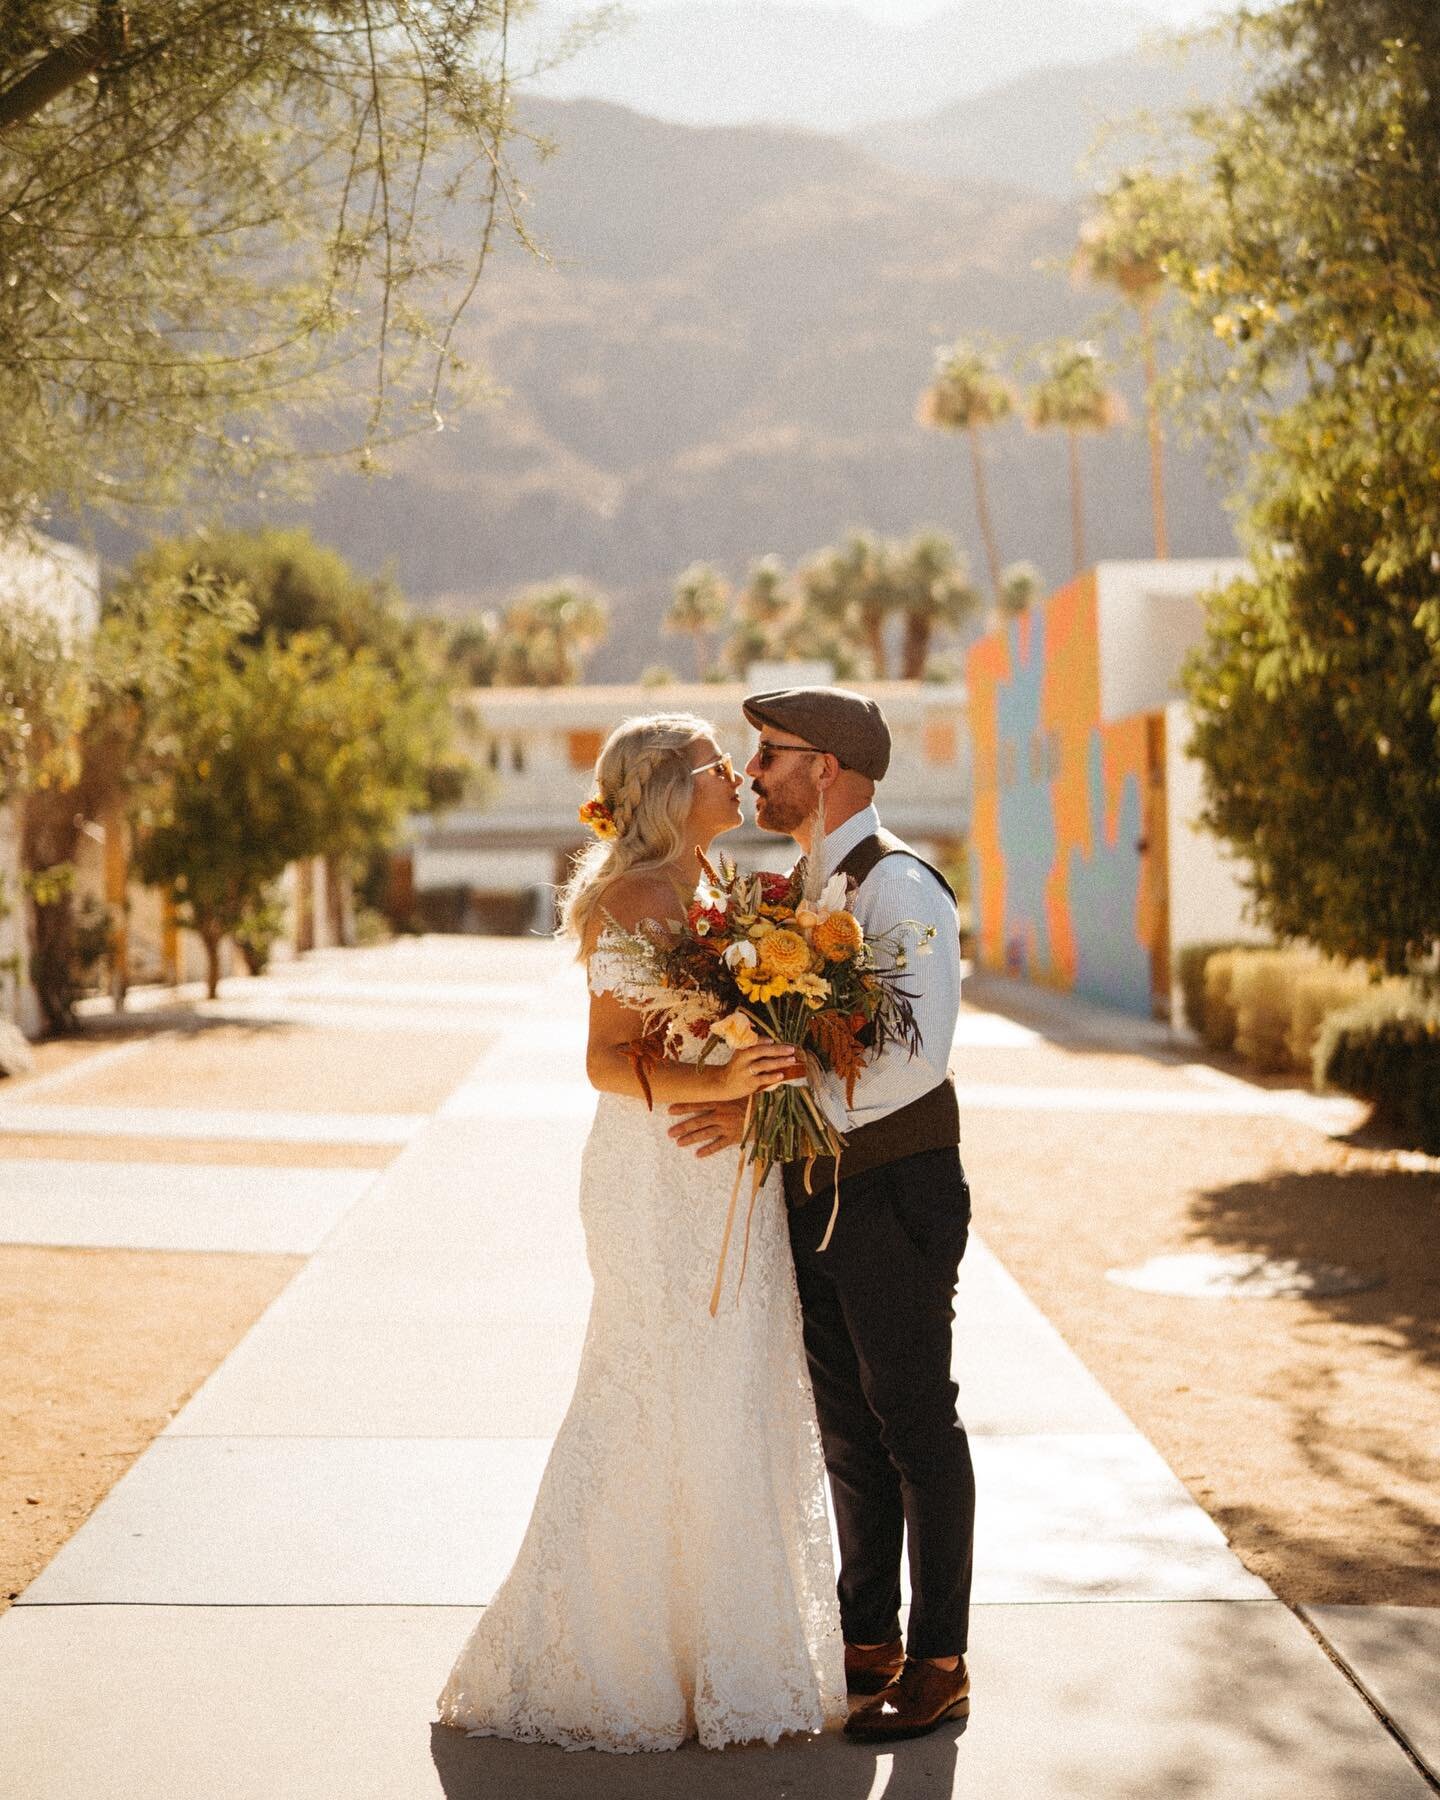 Even if 2021 was just as shitty as 2020, I&rsquo;m happy that I at least got this one perfect day that will last a lifetime. #bestdayever
.
.
.
.
.
#goodbye2021 #palmspringswedding #acehotelpalmsprings #palmsprings #junewedding #love